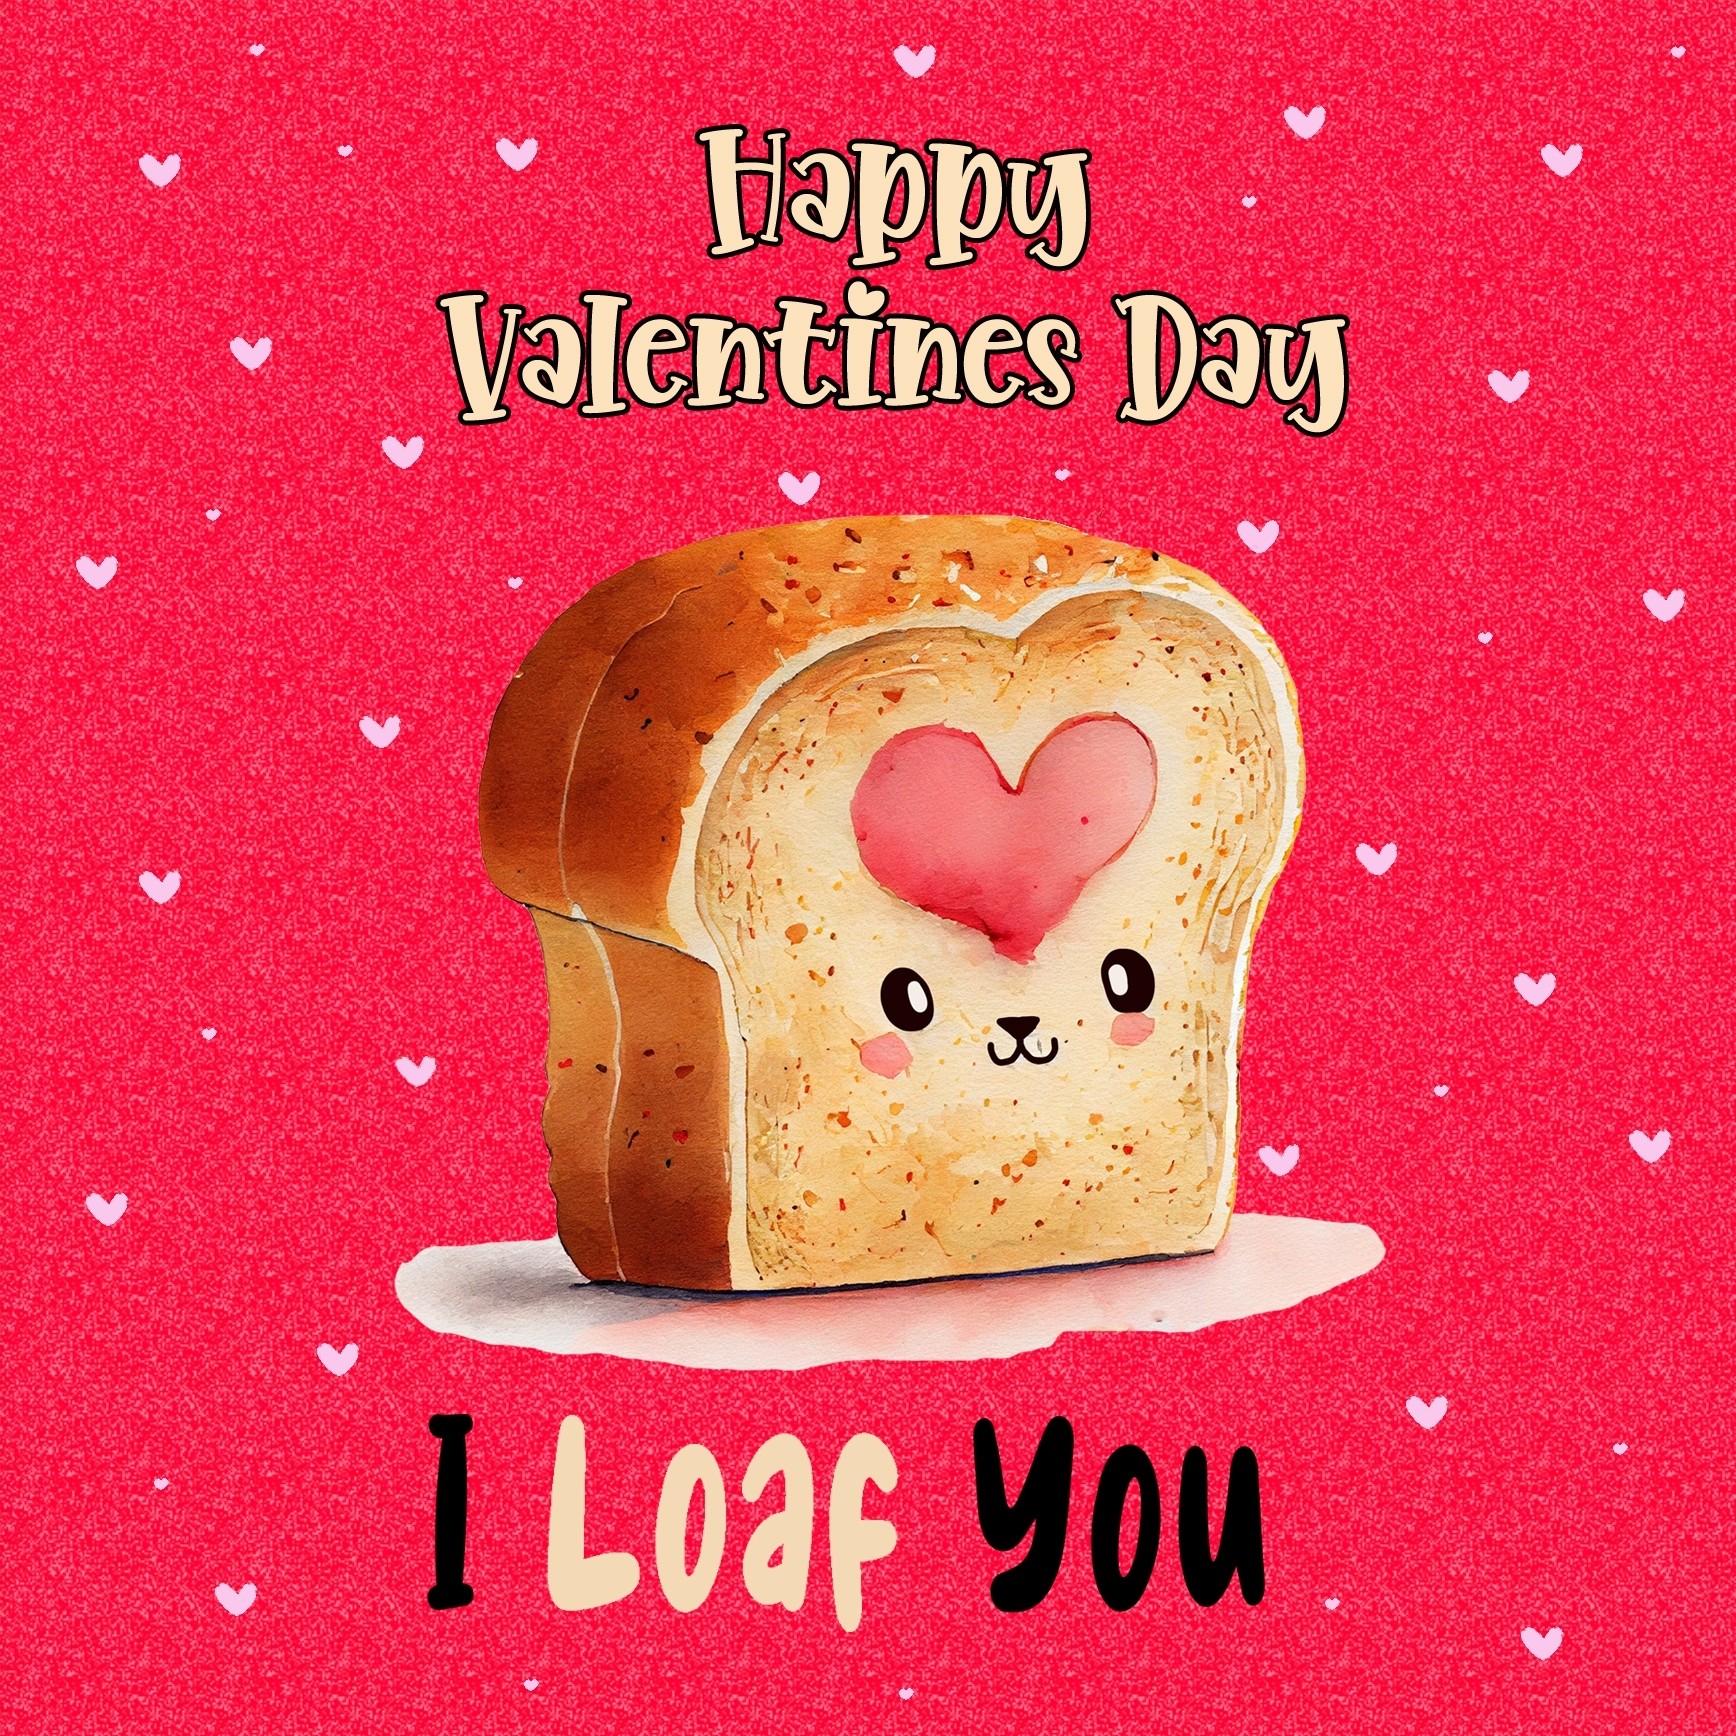 Funny Pun Valentines Day Square Card (Loaf You)